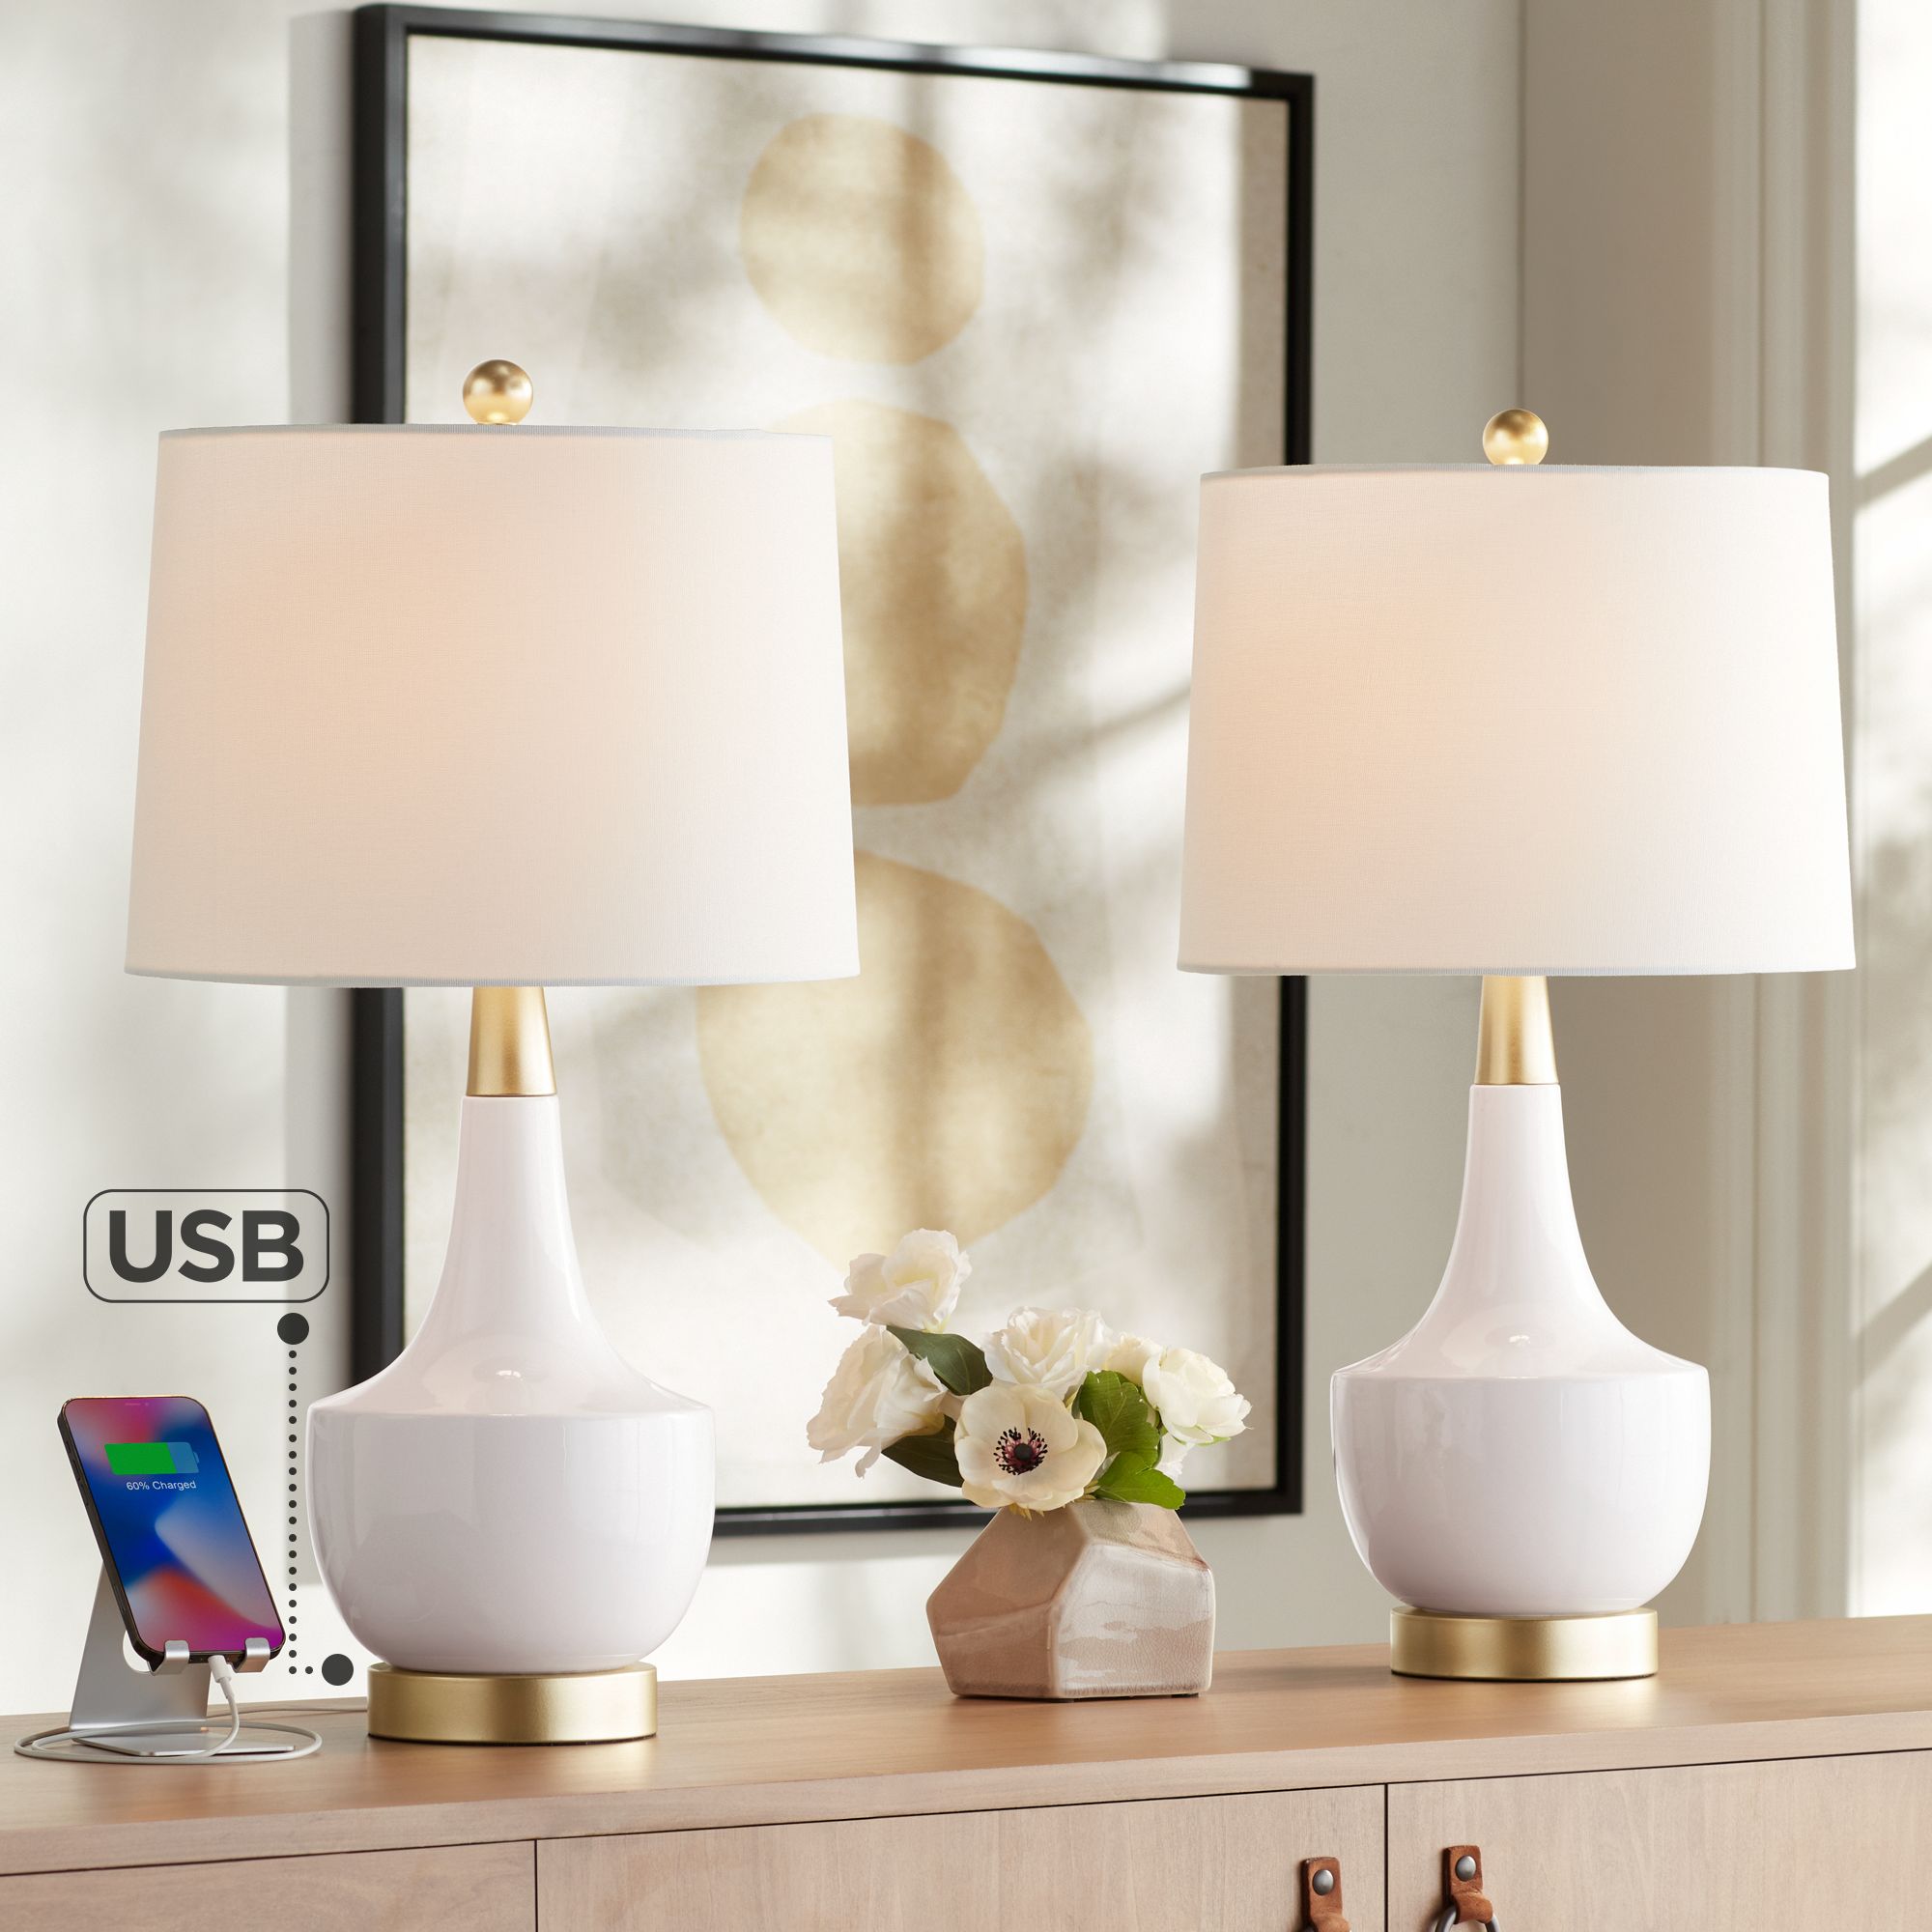 Jetset Gold and White Ceramic USB Table Lamps Set of 2 - #901C2